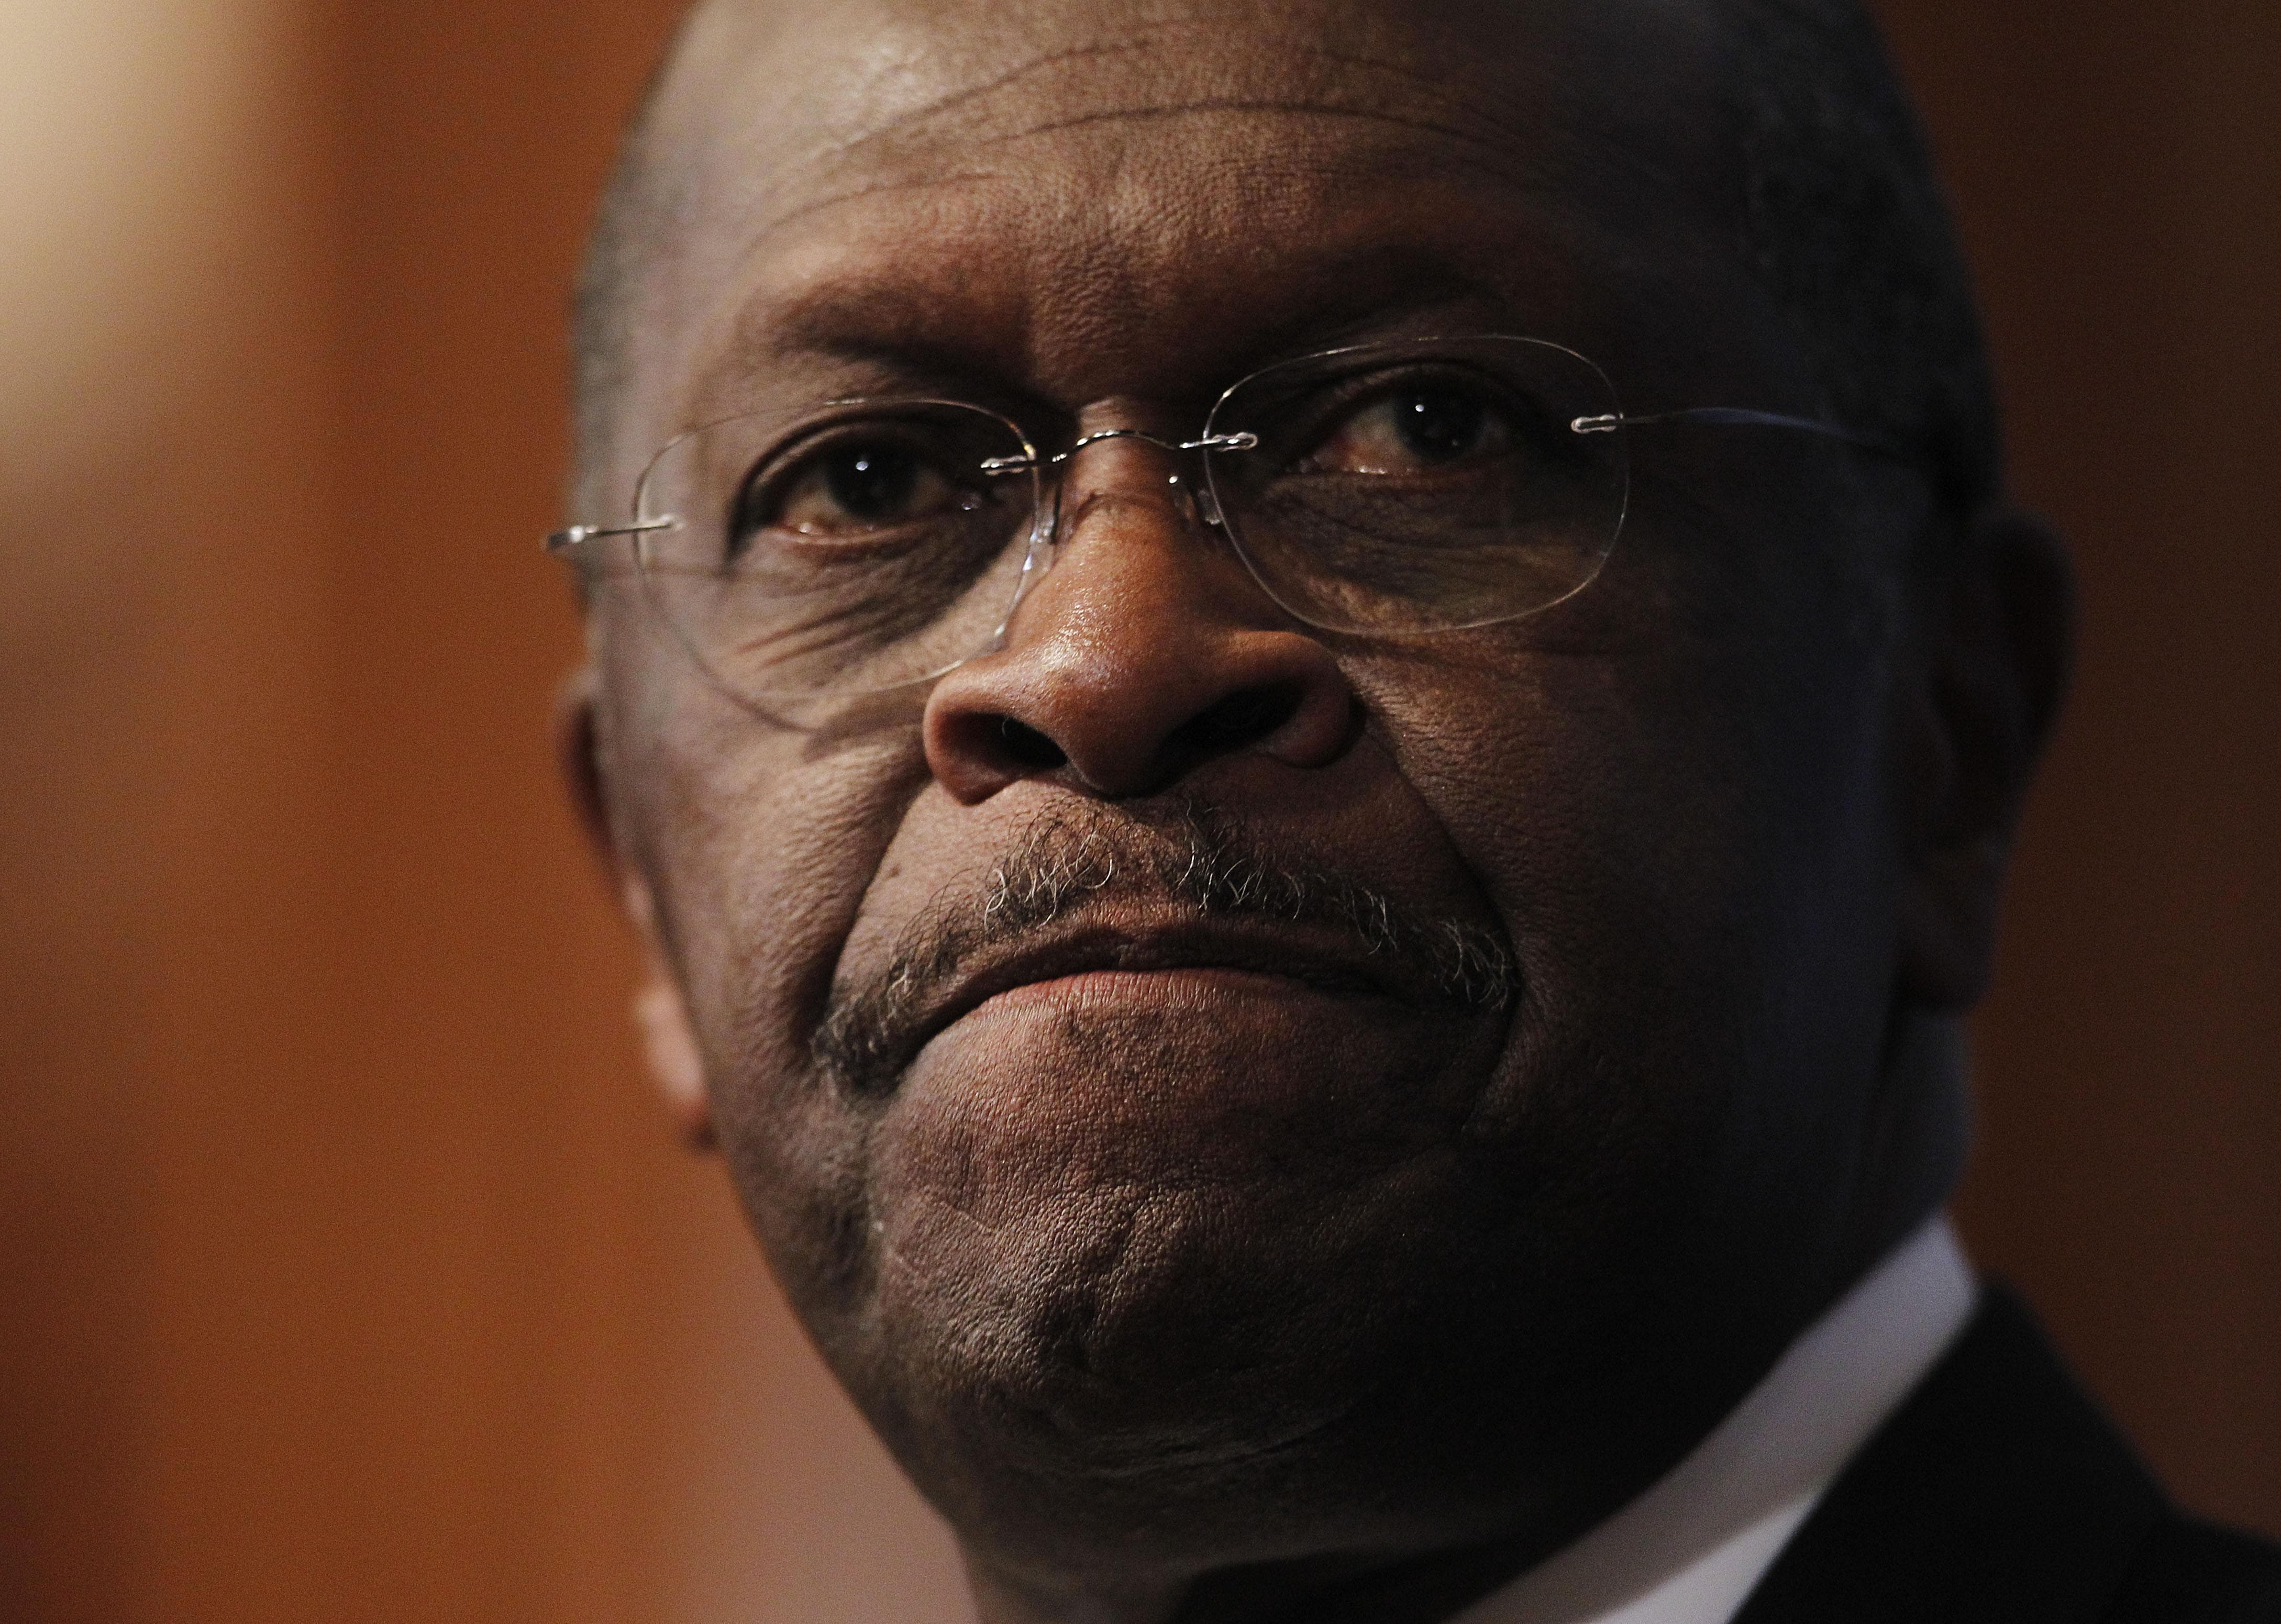 Herman Cain Fends Off Allegations Of Sexual Harassment Here and image